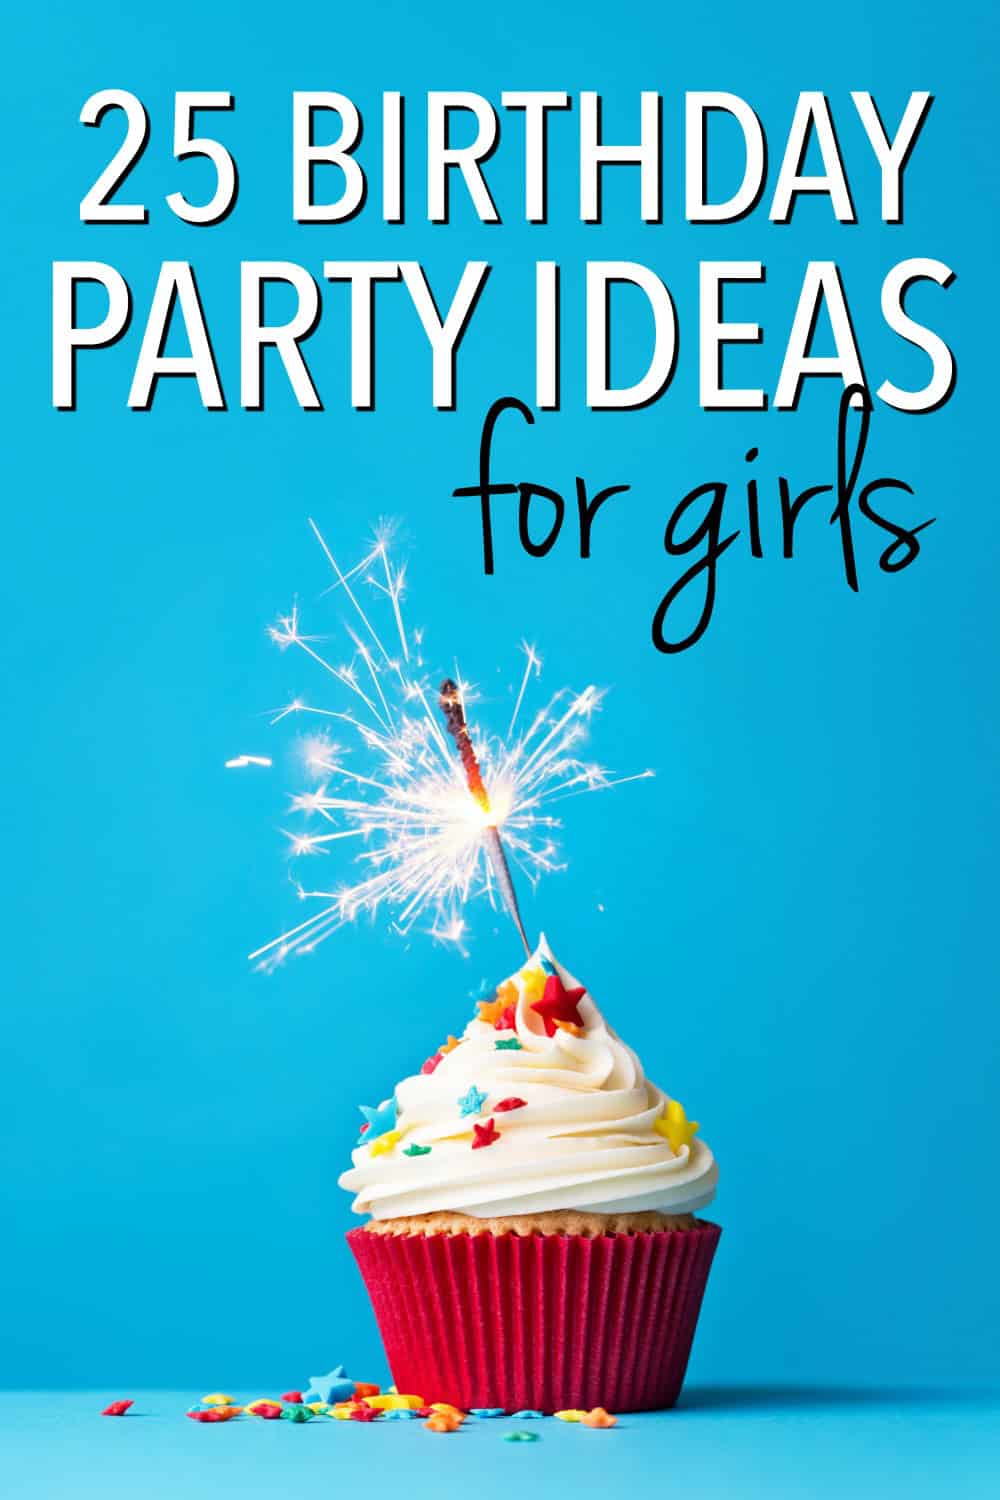 Birthday Party Theme Ideas For 12 Year Olds - Birthday Cake Images